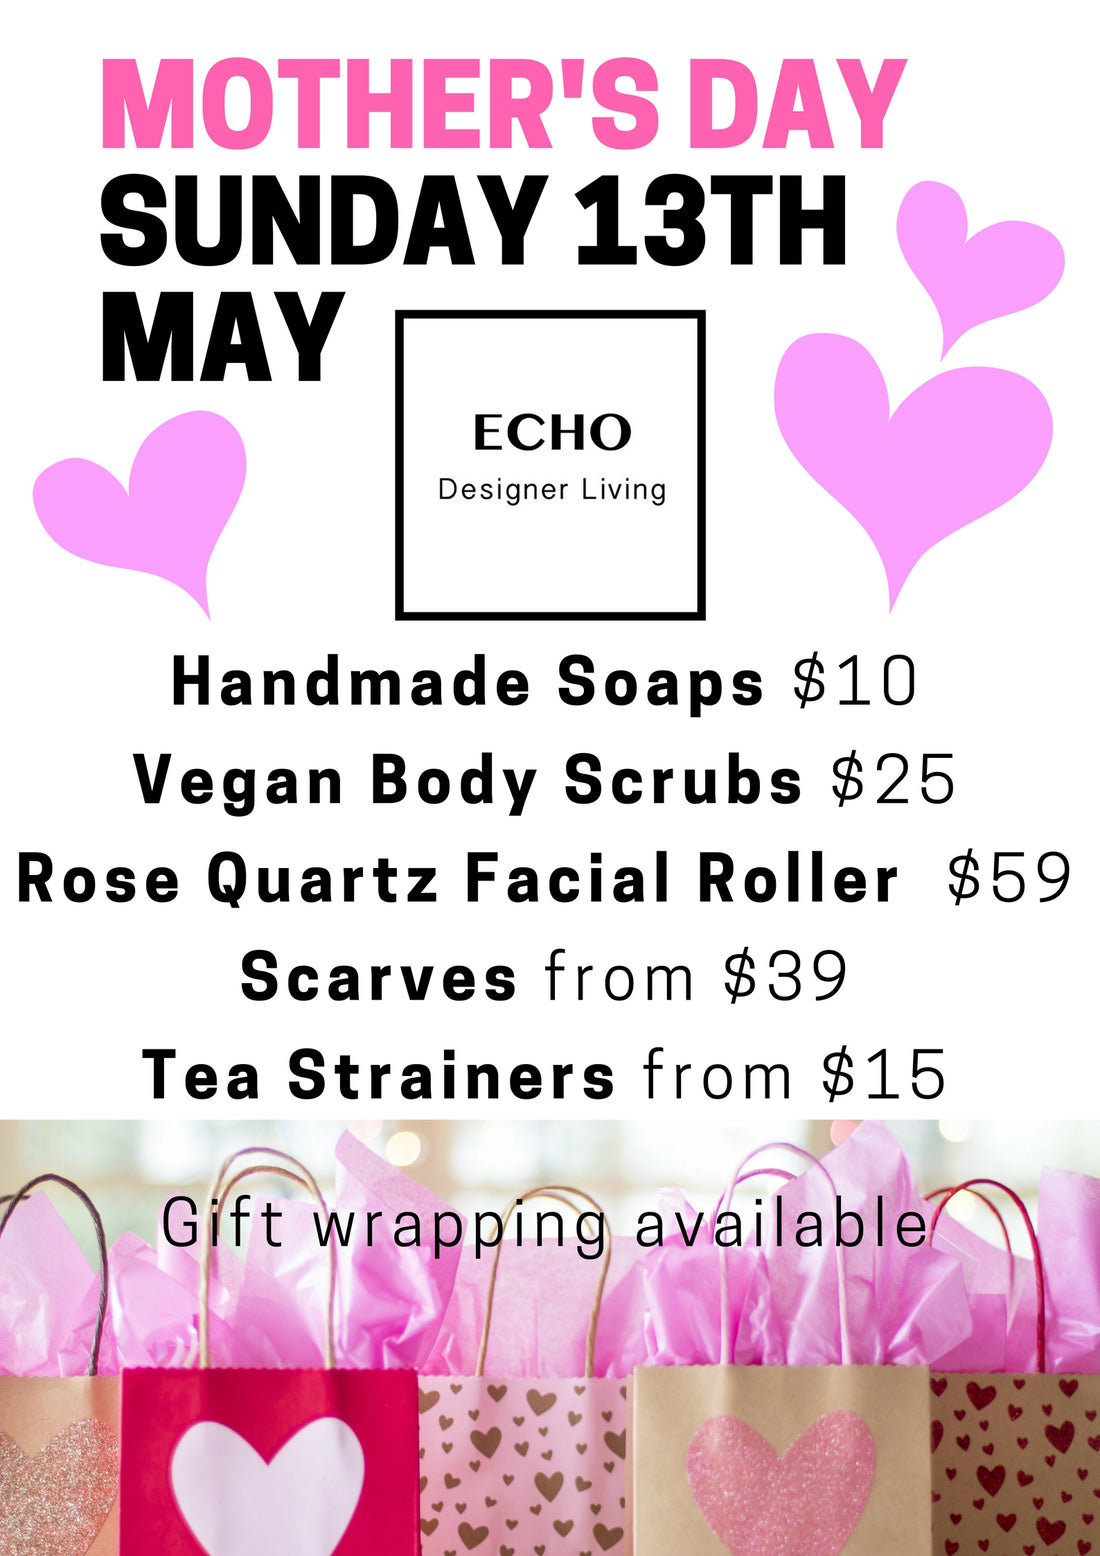 Mother's Day made easy at ECHO boutiques